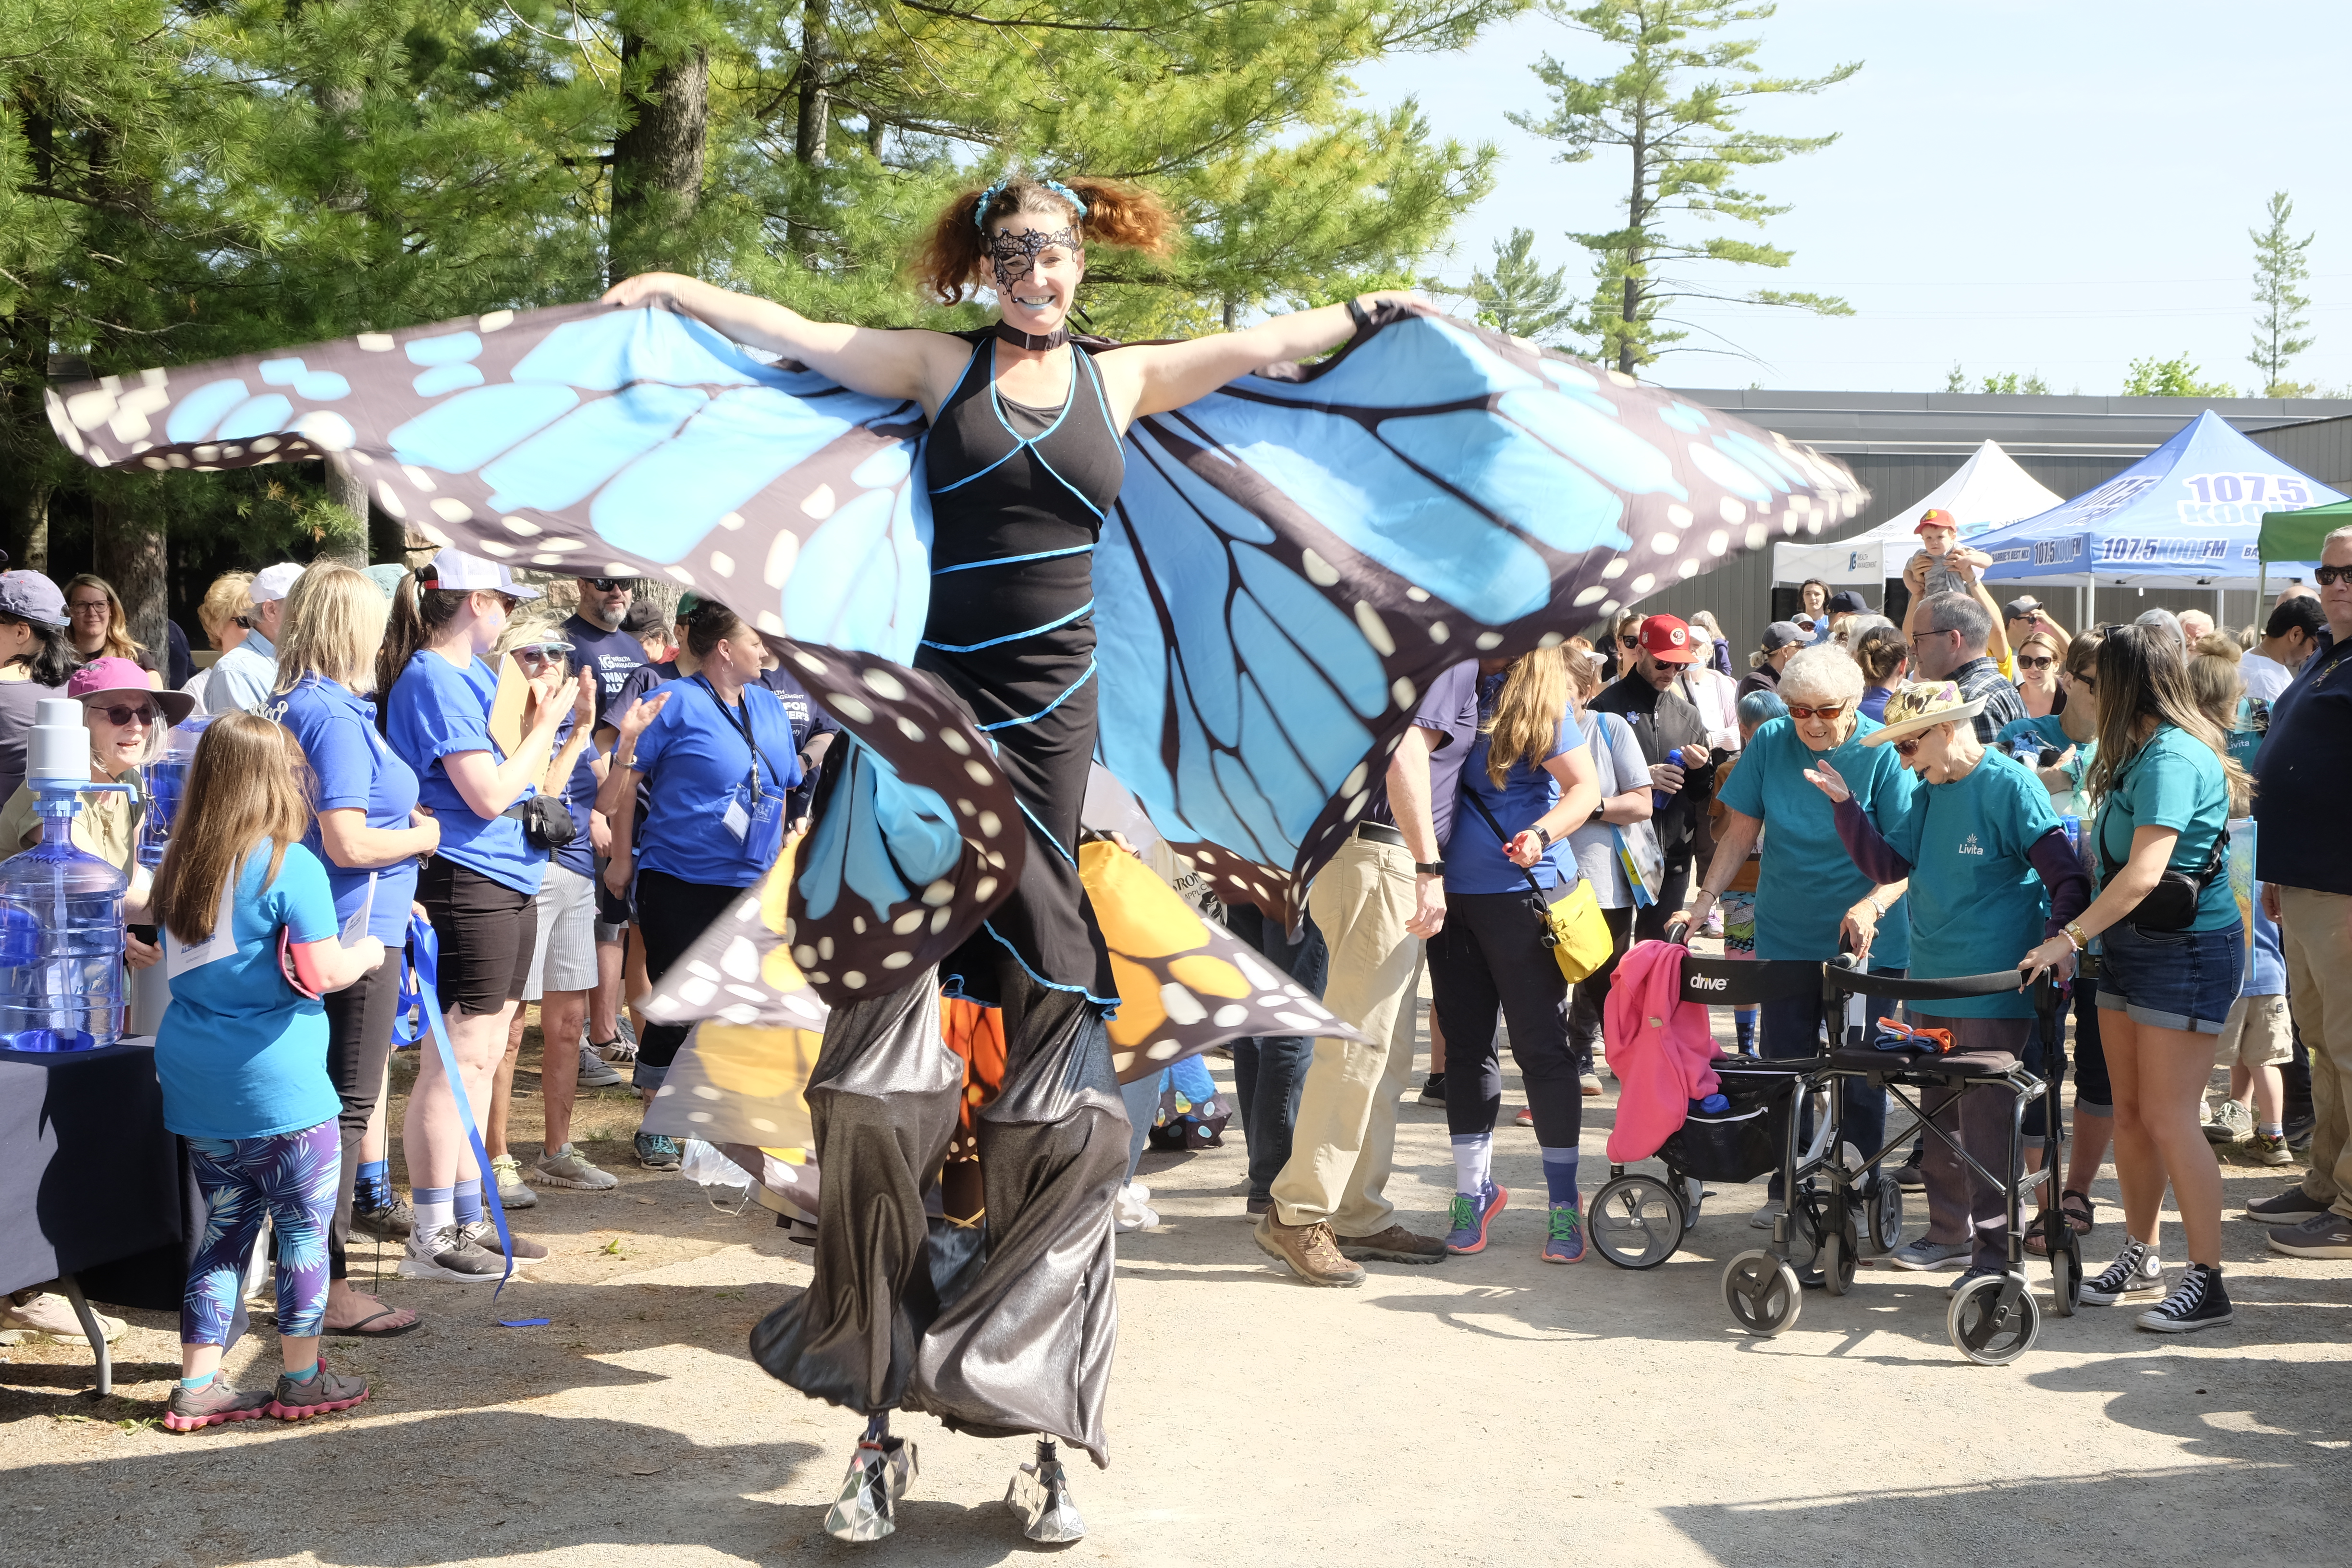 A person dressed as a butterfly on stilts